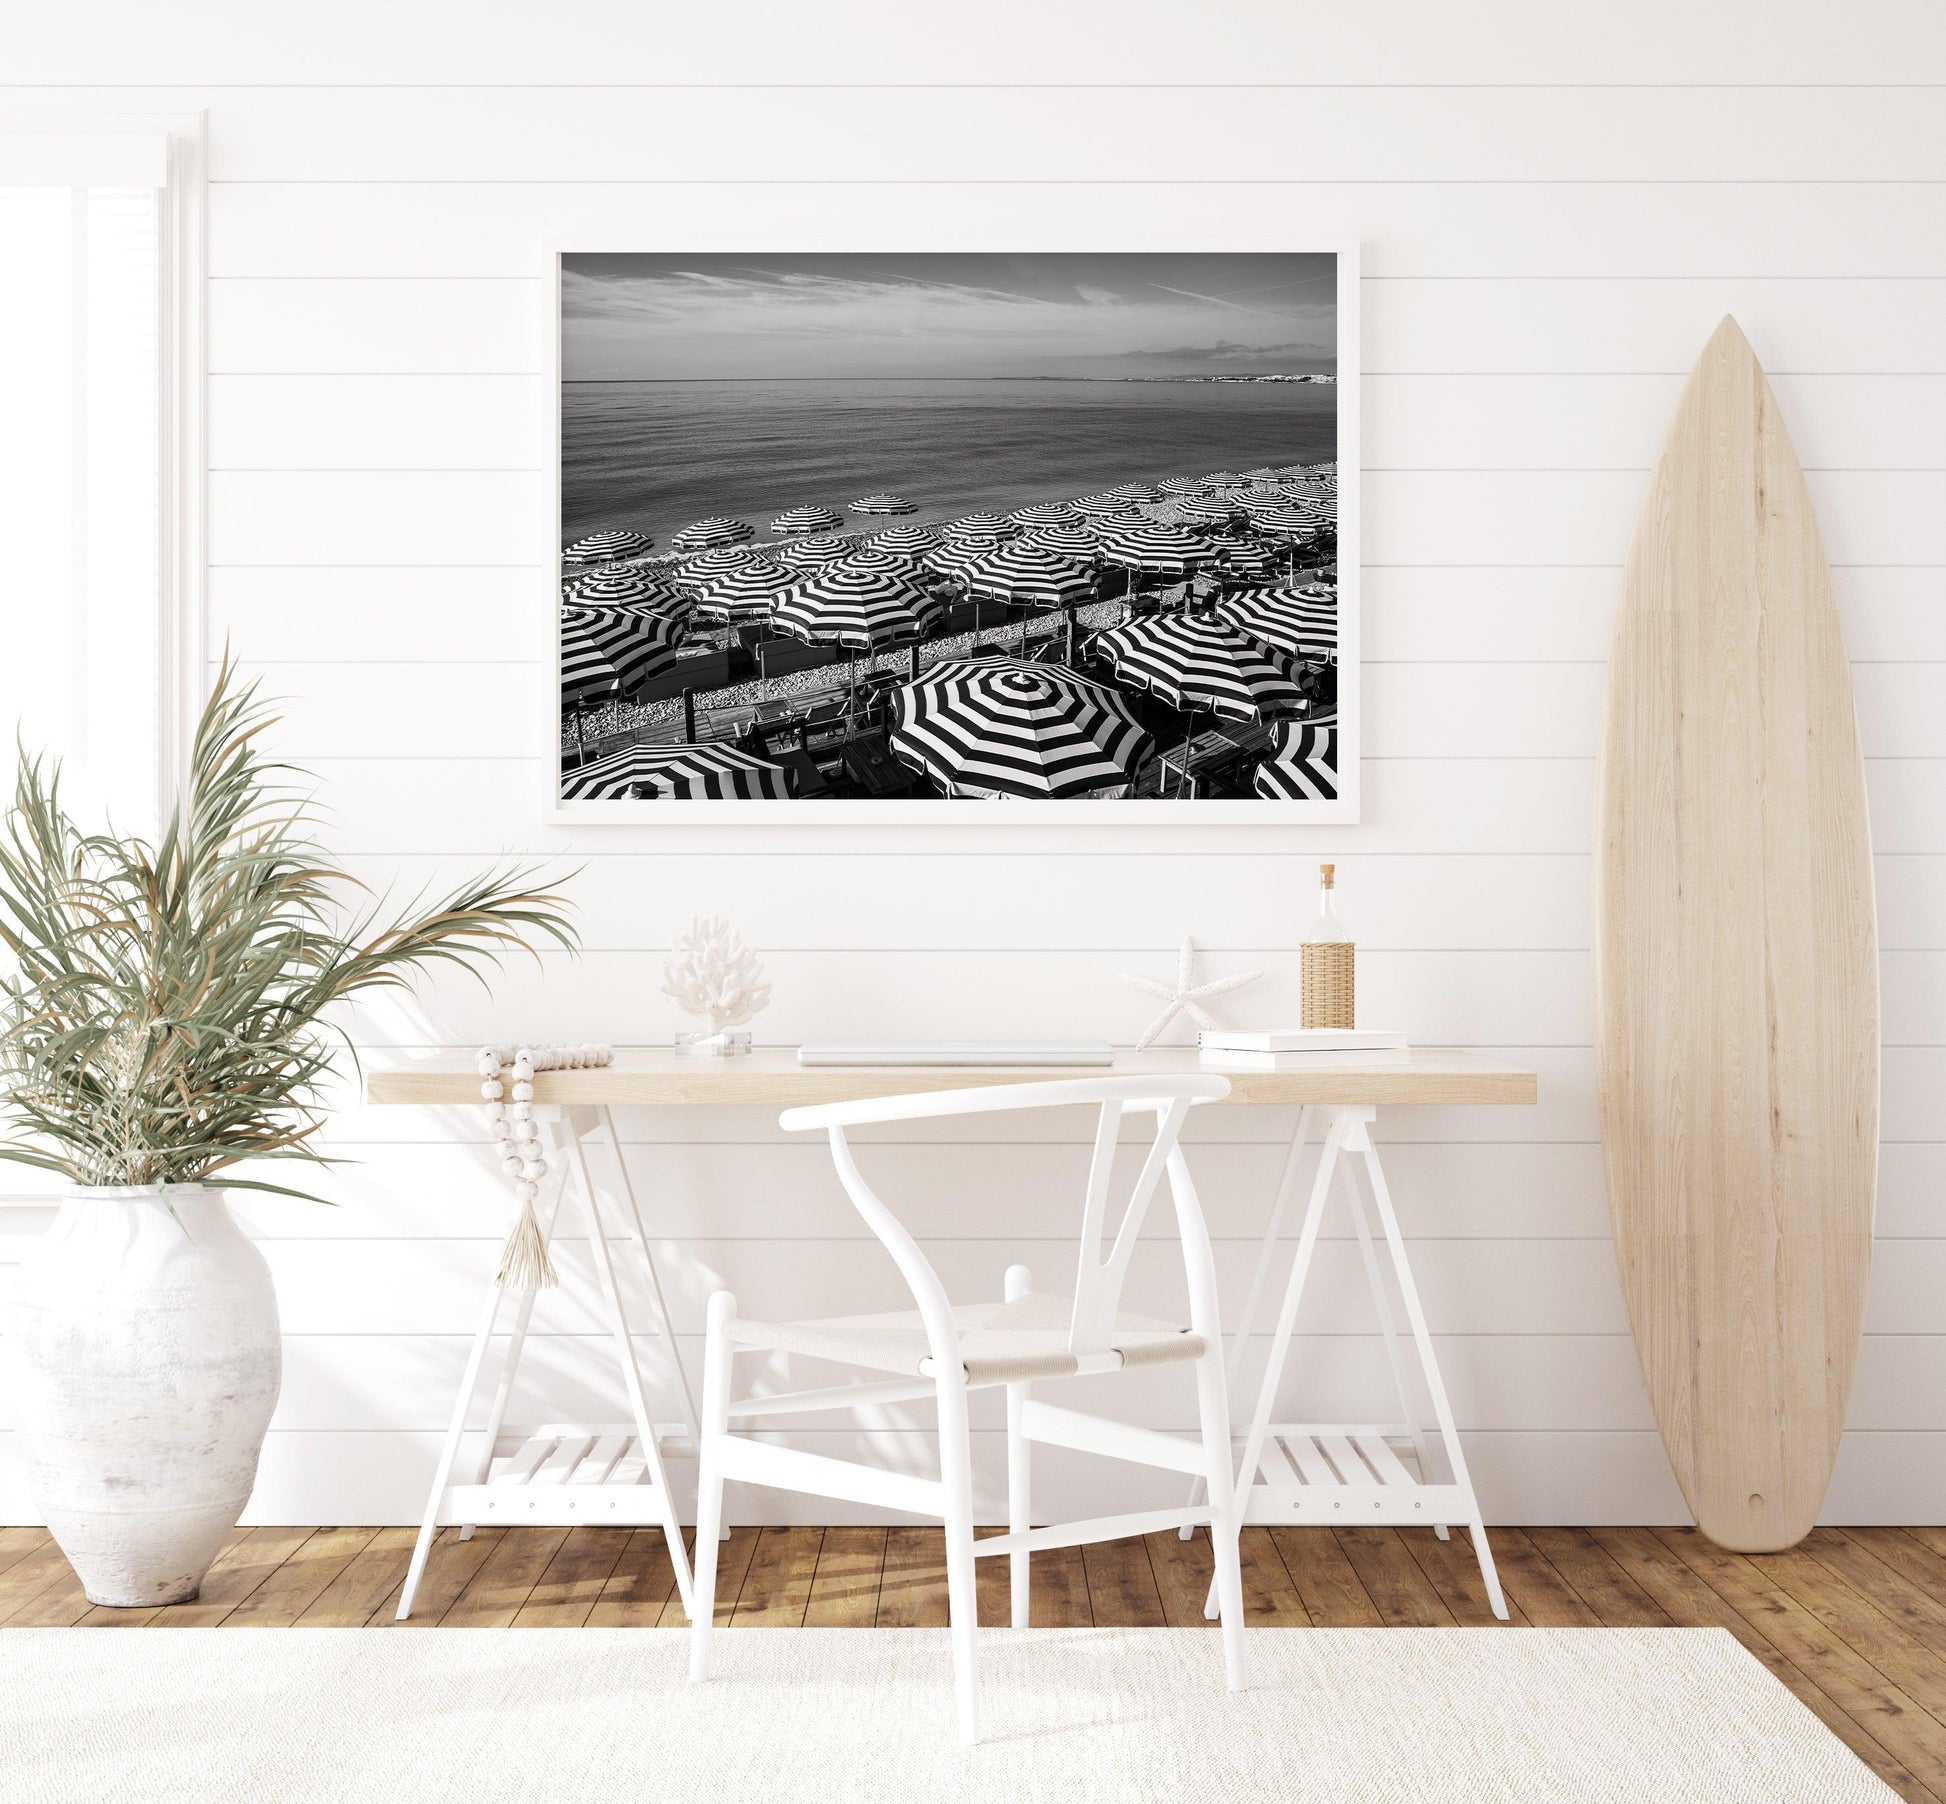 Black and White Striped Beach Umbrellas III | French Riviera Photography Print - Departures Print Shop